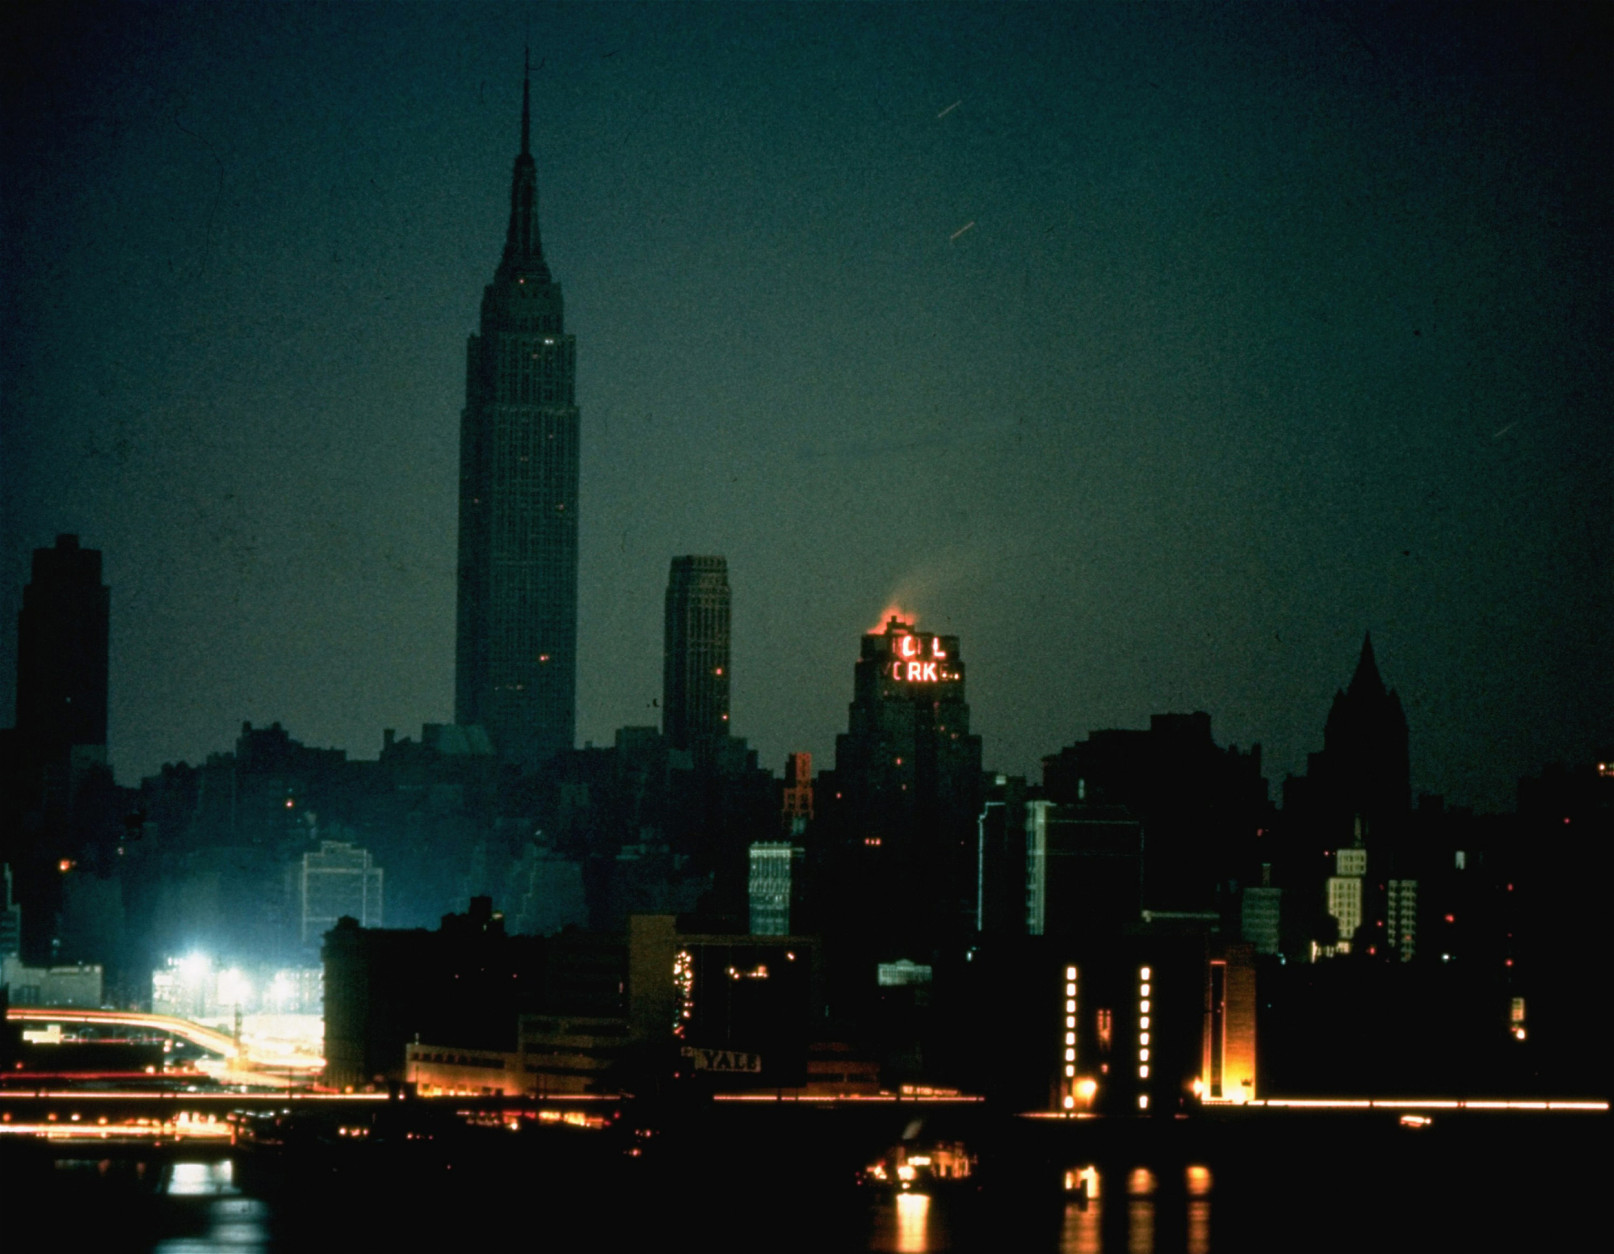 FILE - In this Nov. 9, 1965, file photo, New York City is seen in darkness from the Queens neighborhood of Long Island City during a power failure that left most of the northeastern United States and parts of Canada without power for hours. The buildings with lights had emergency power generators. (AP Photo/File)